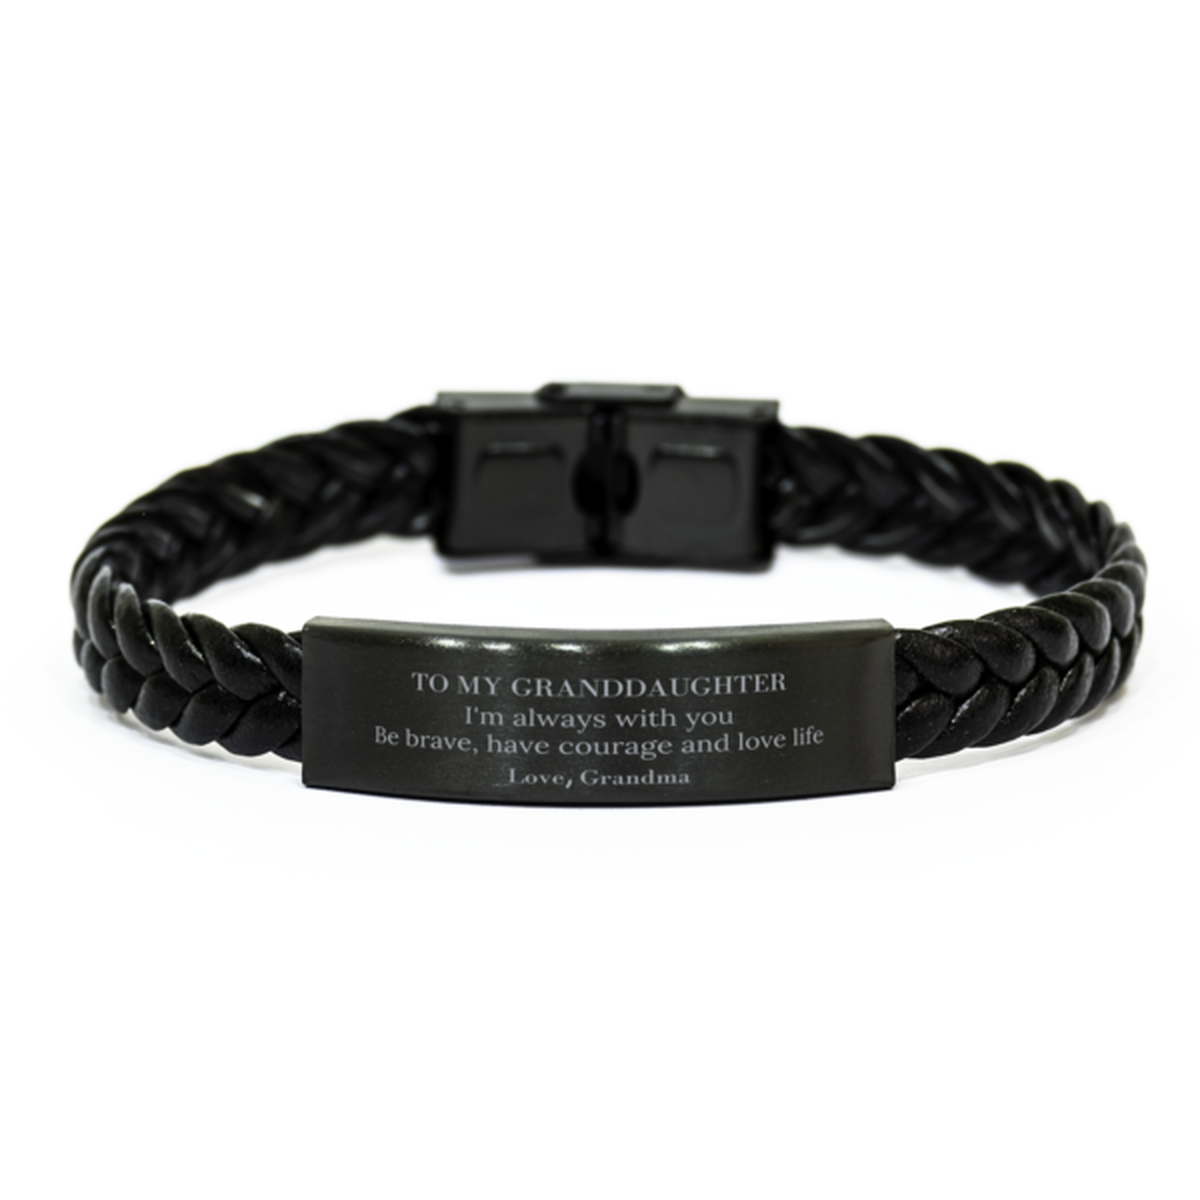 To My Granddaughter Gifts from Grandma, Unique Braided Leather Bracelet Inspirational Christmas Birthday Graduation Gifts for Granddaughter I'm always with you. Be brave, have courage and love life. Love, Grandma